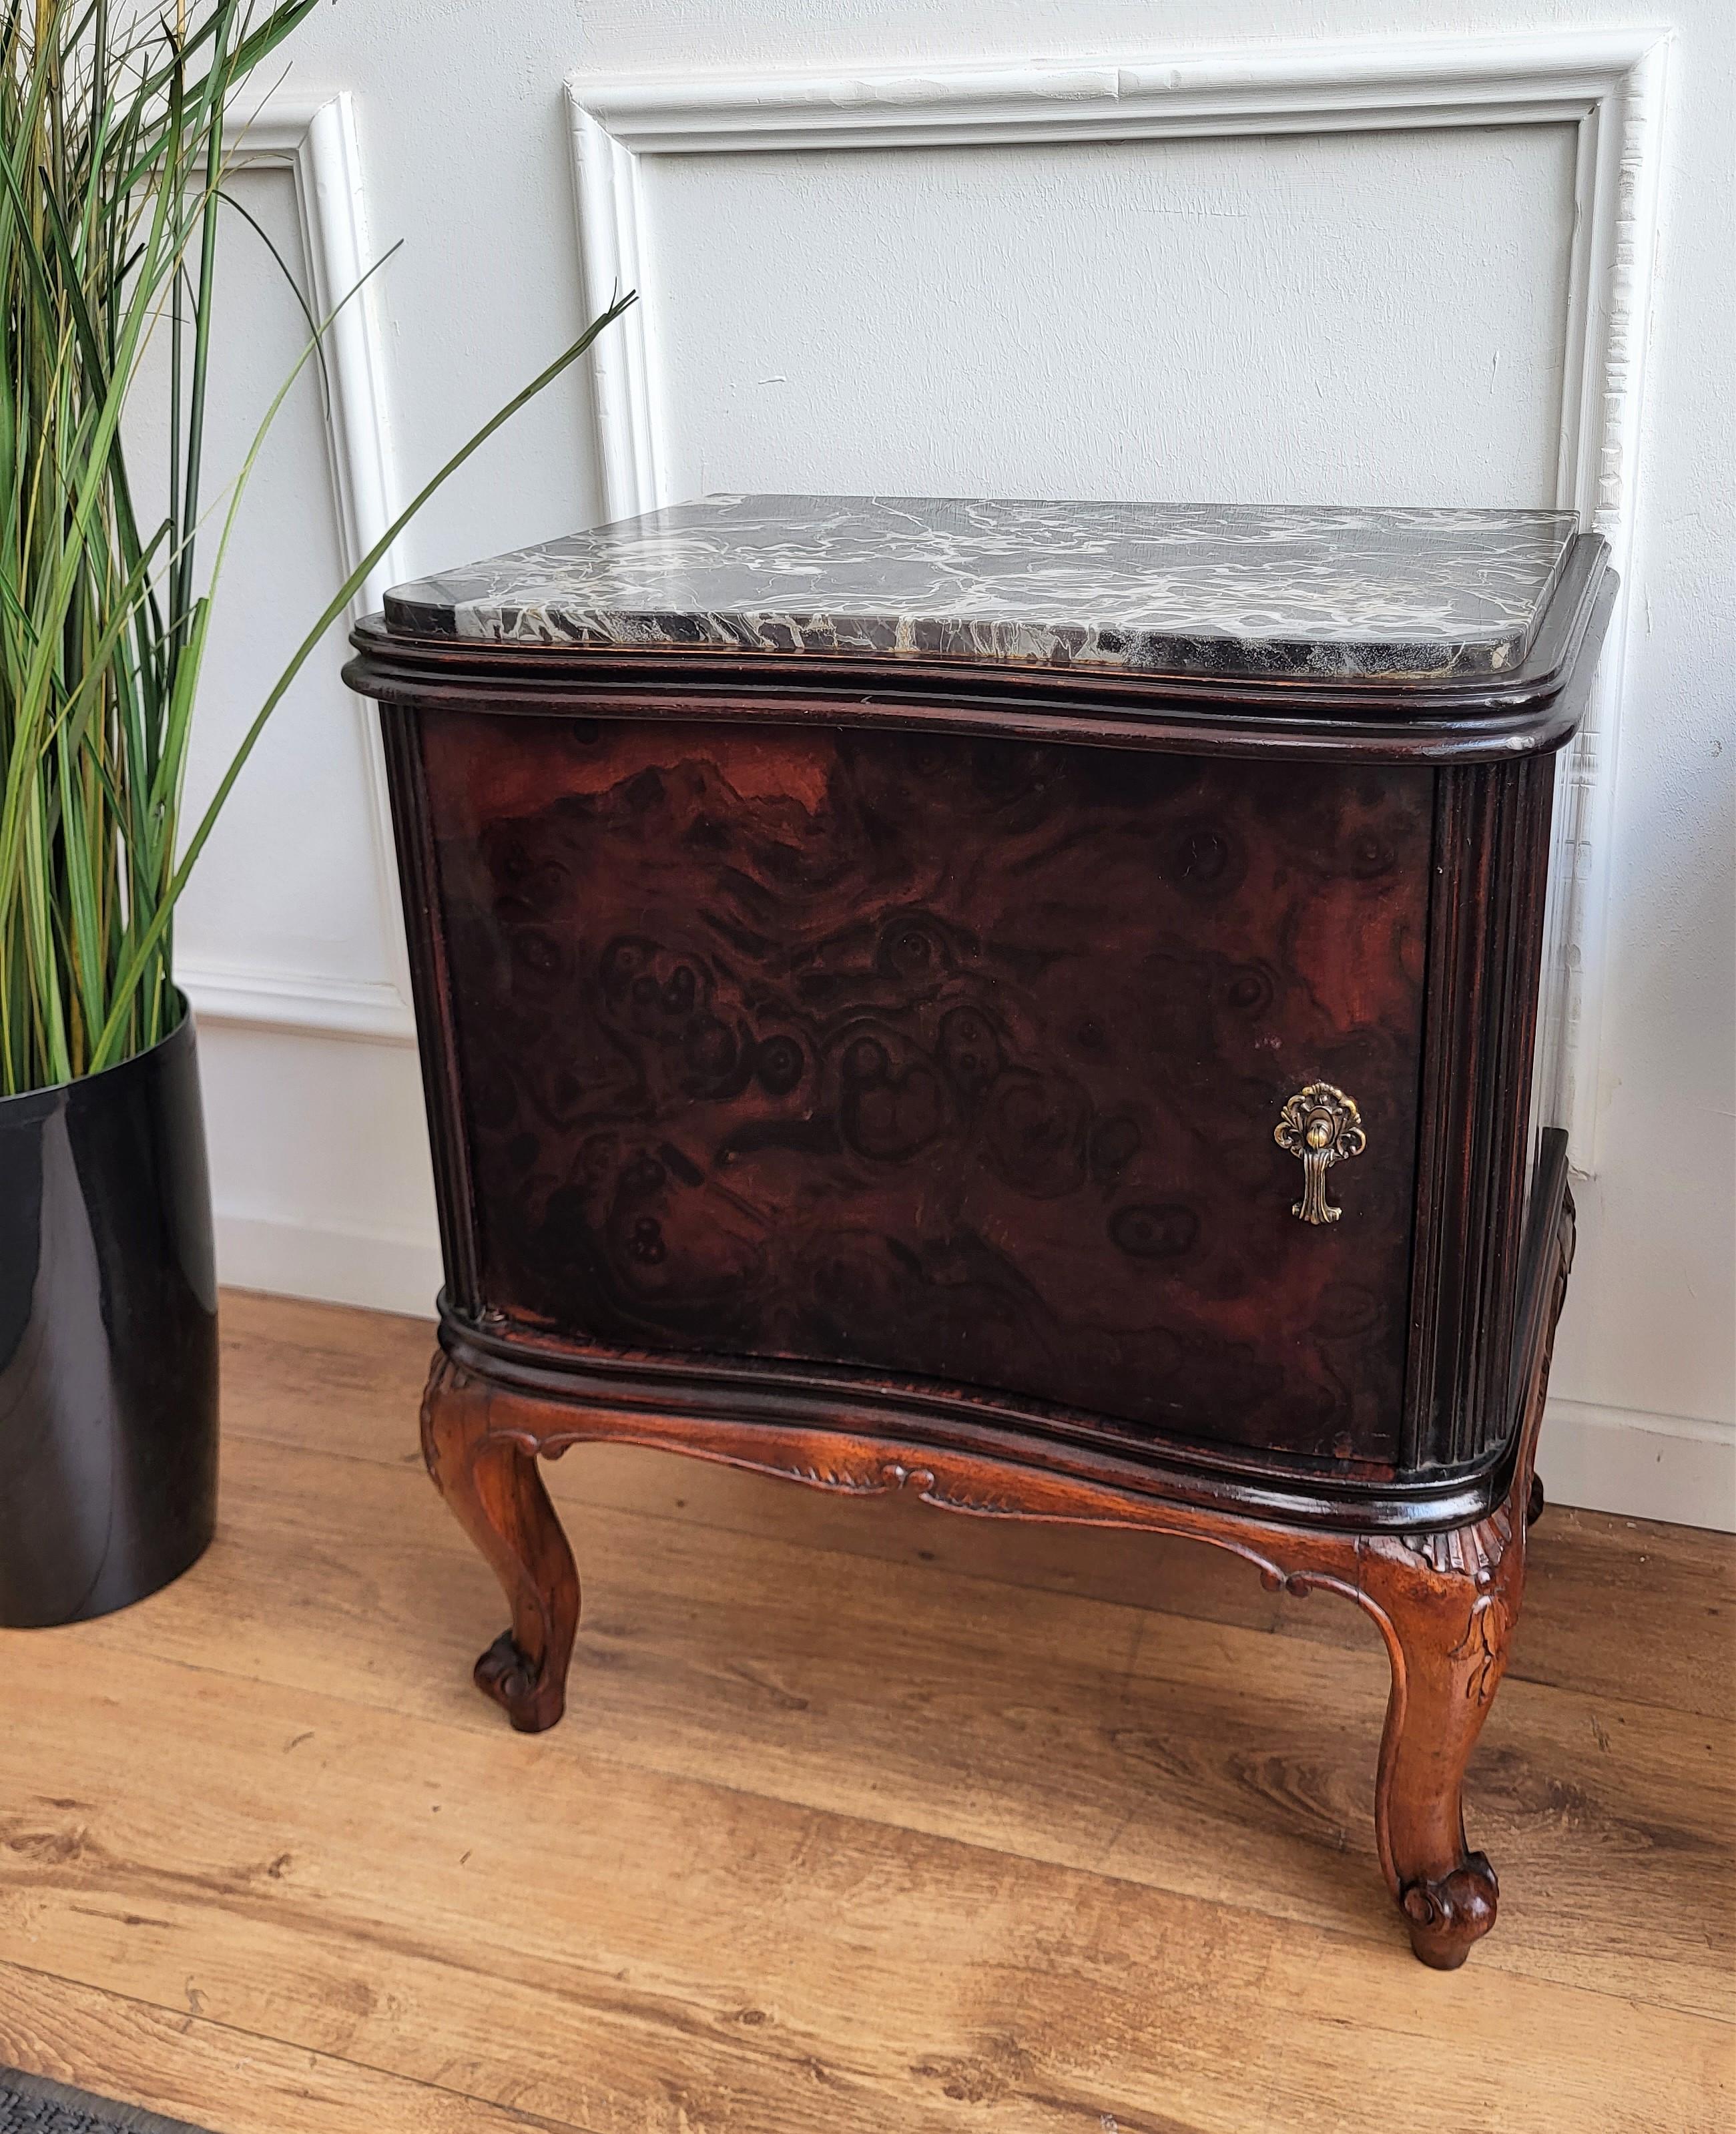 Very elegant and refined Italian 1950s Mid-Century Modern, Chippendale style, pair of bedside tables with wood double front door, Portoro marble top and inlay decors on the sides and doors, and brass details such as the 2 handles and the 4 foot